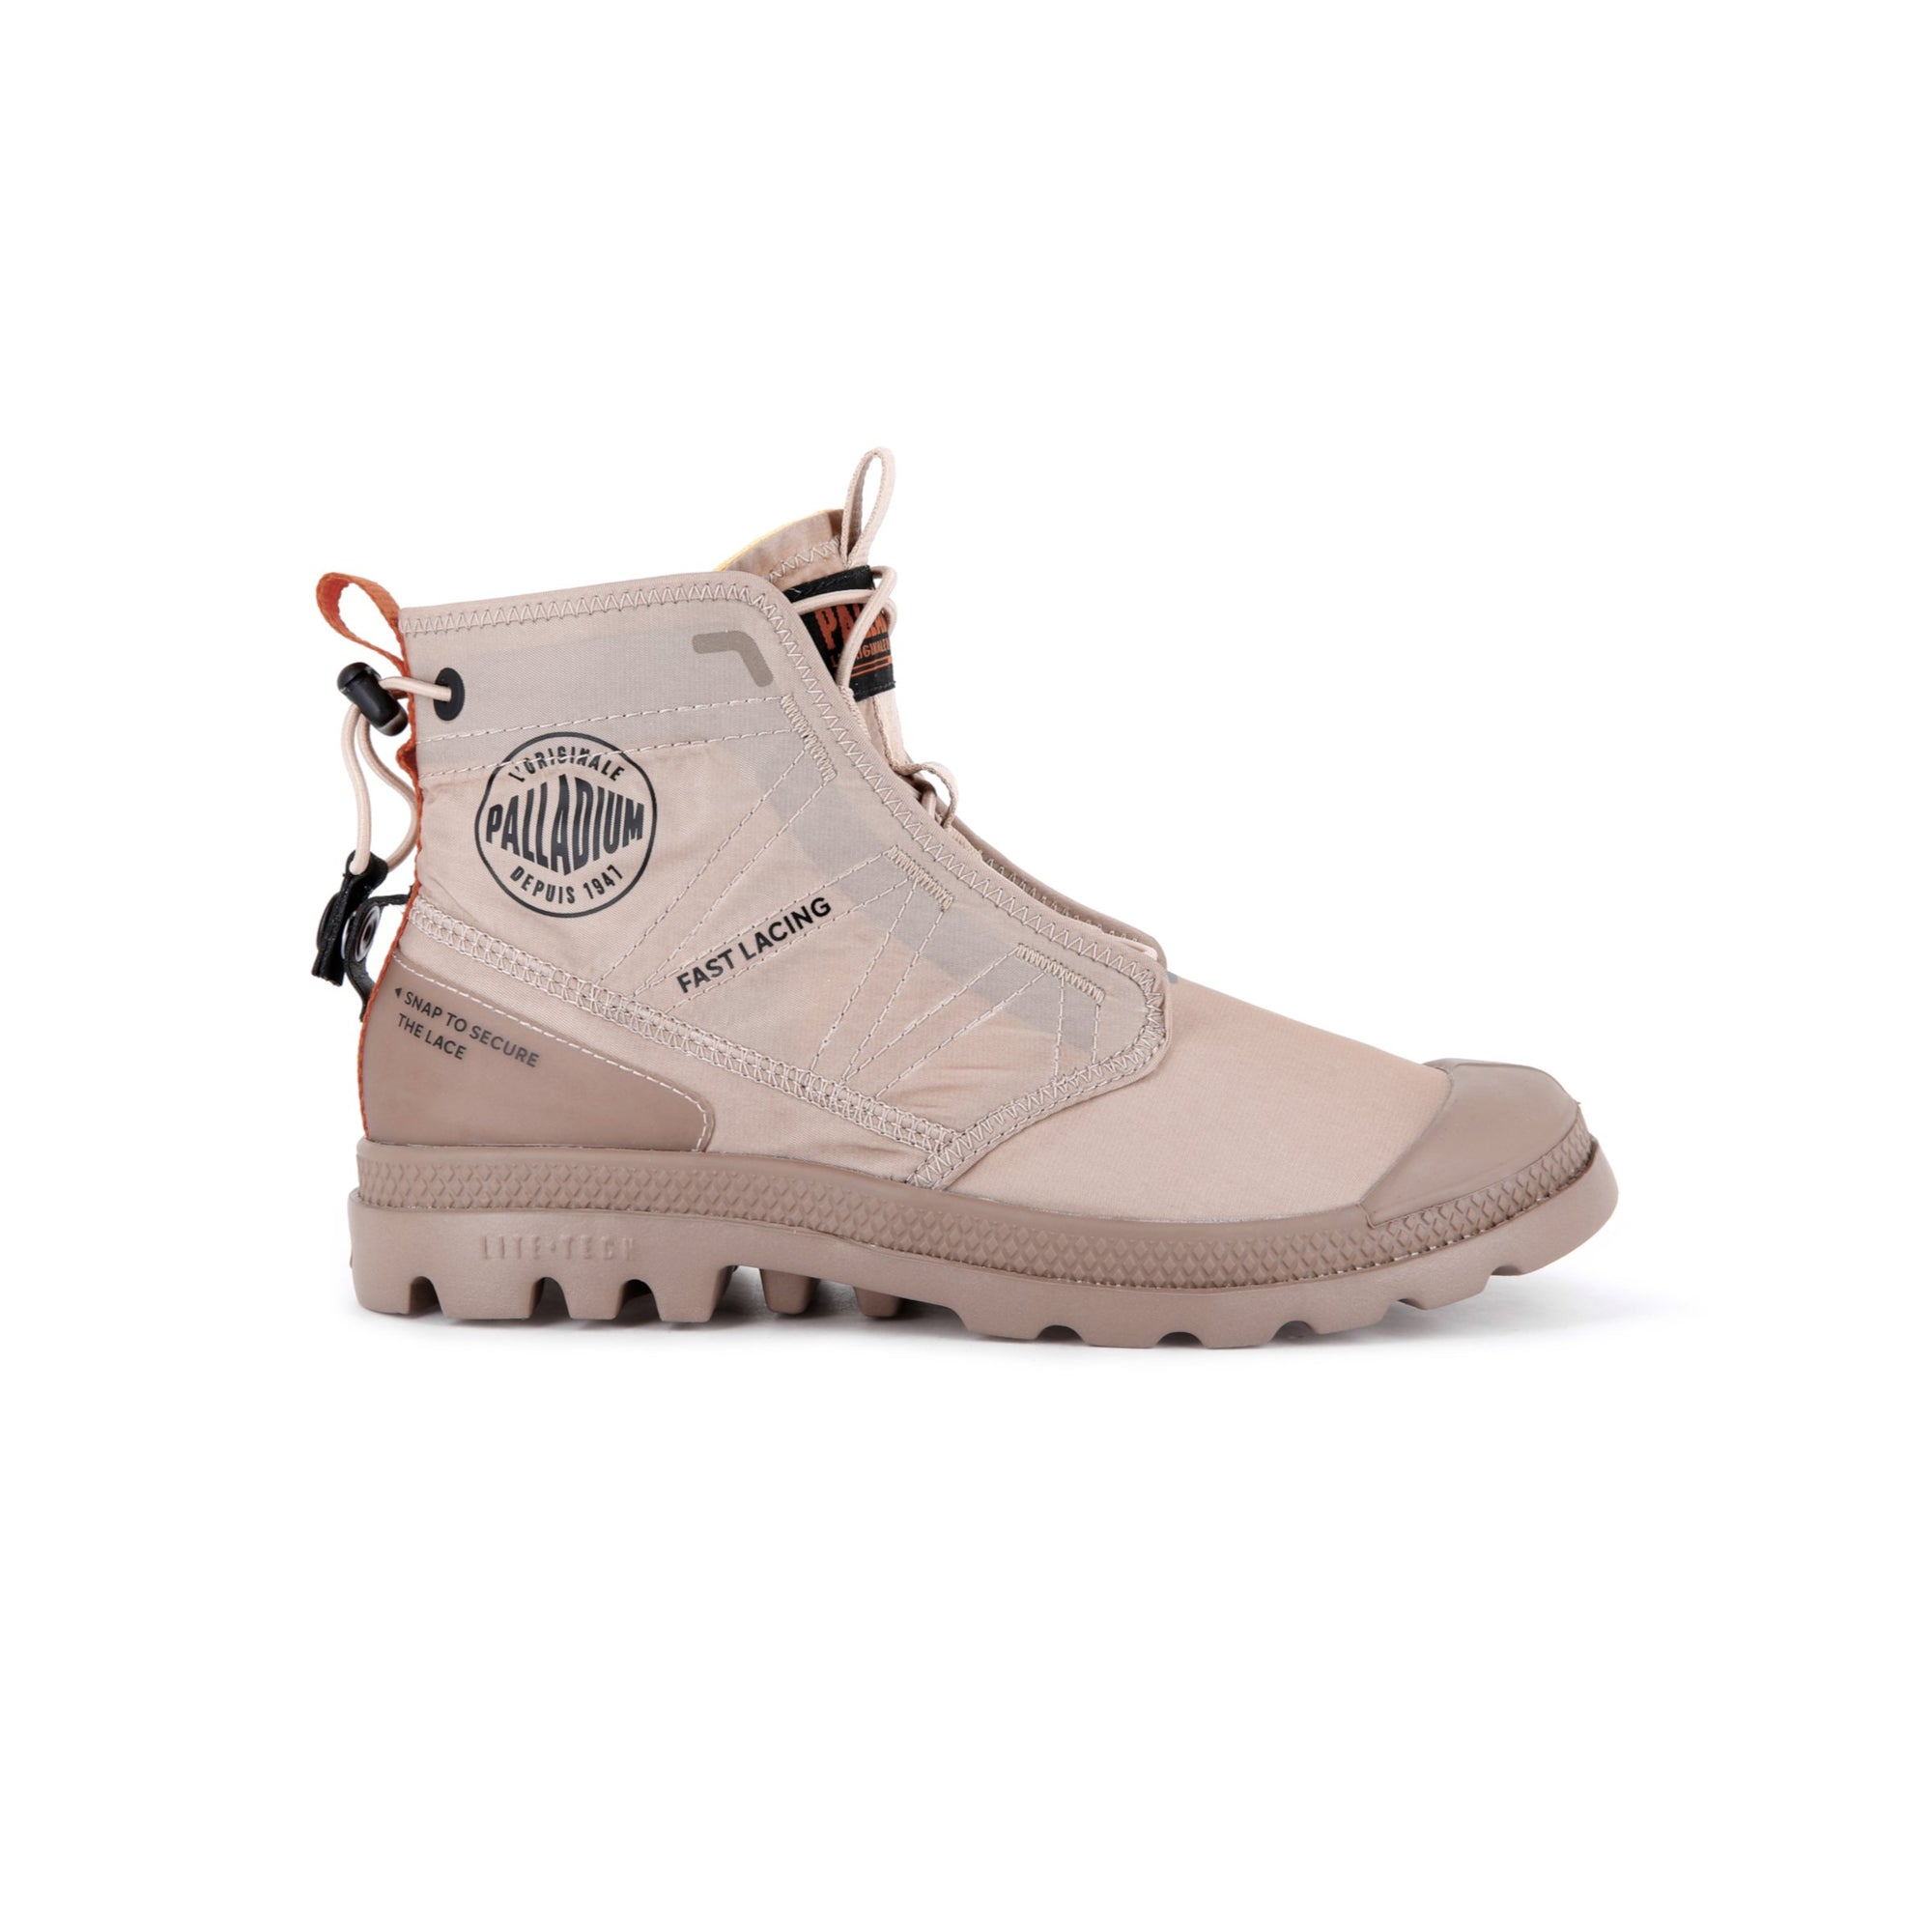 Pampa Travel Lite - Nude Dust